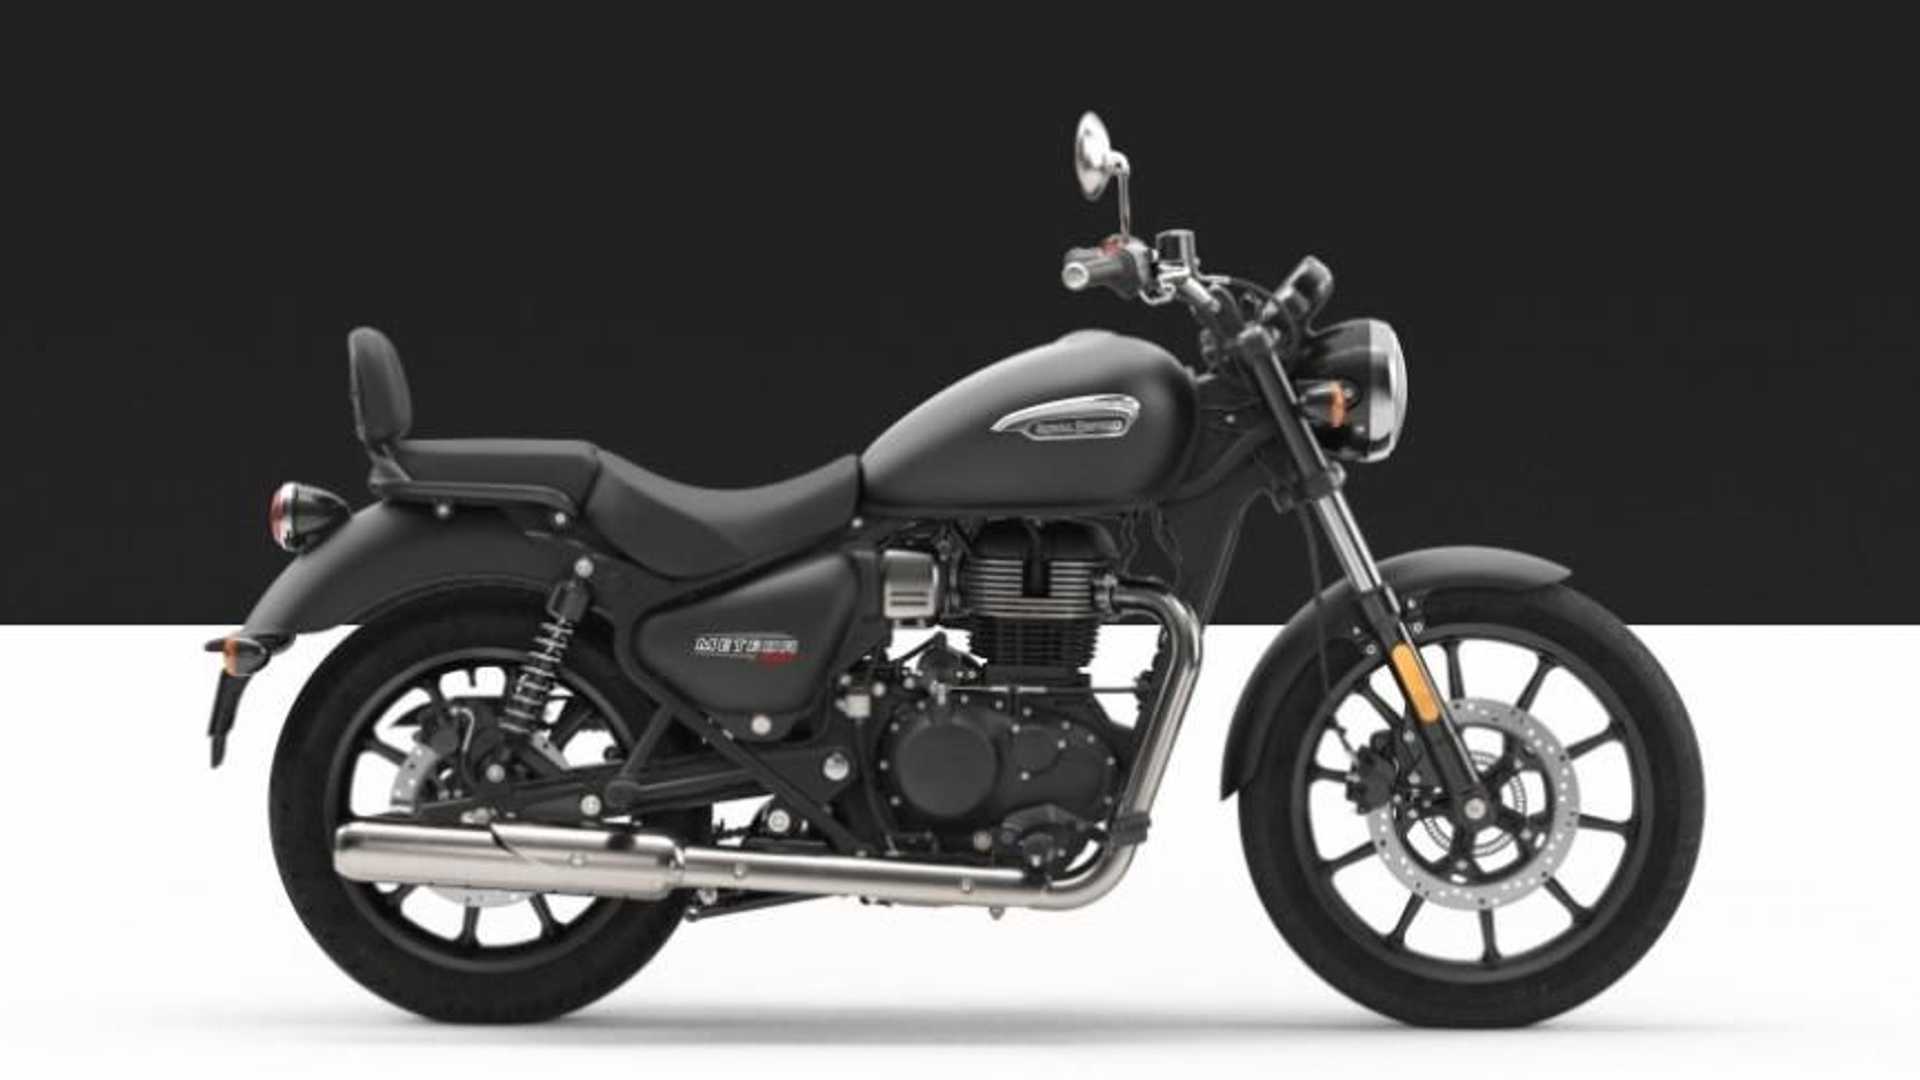 The Royal Enfield Meteor 350 Is Finally Here. For Real